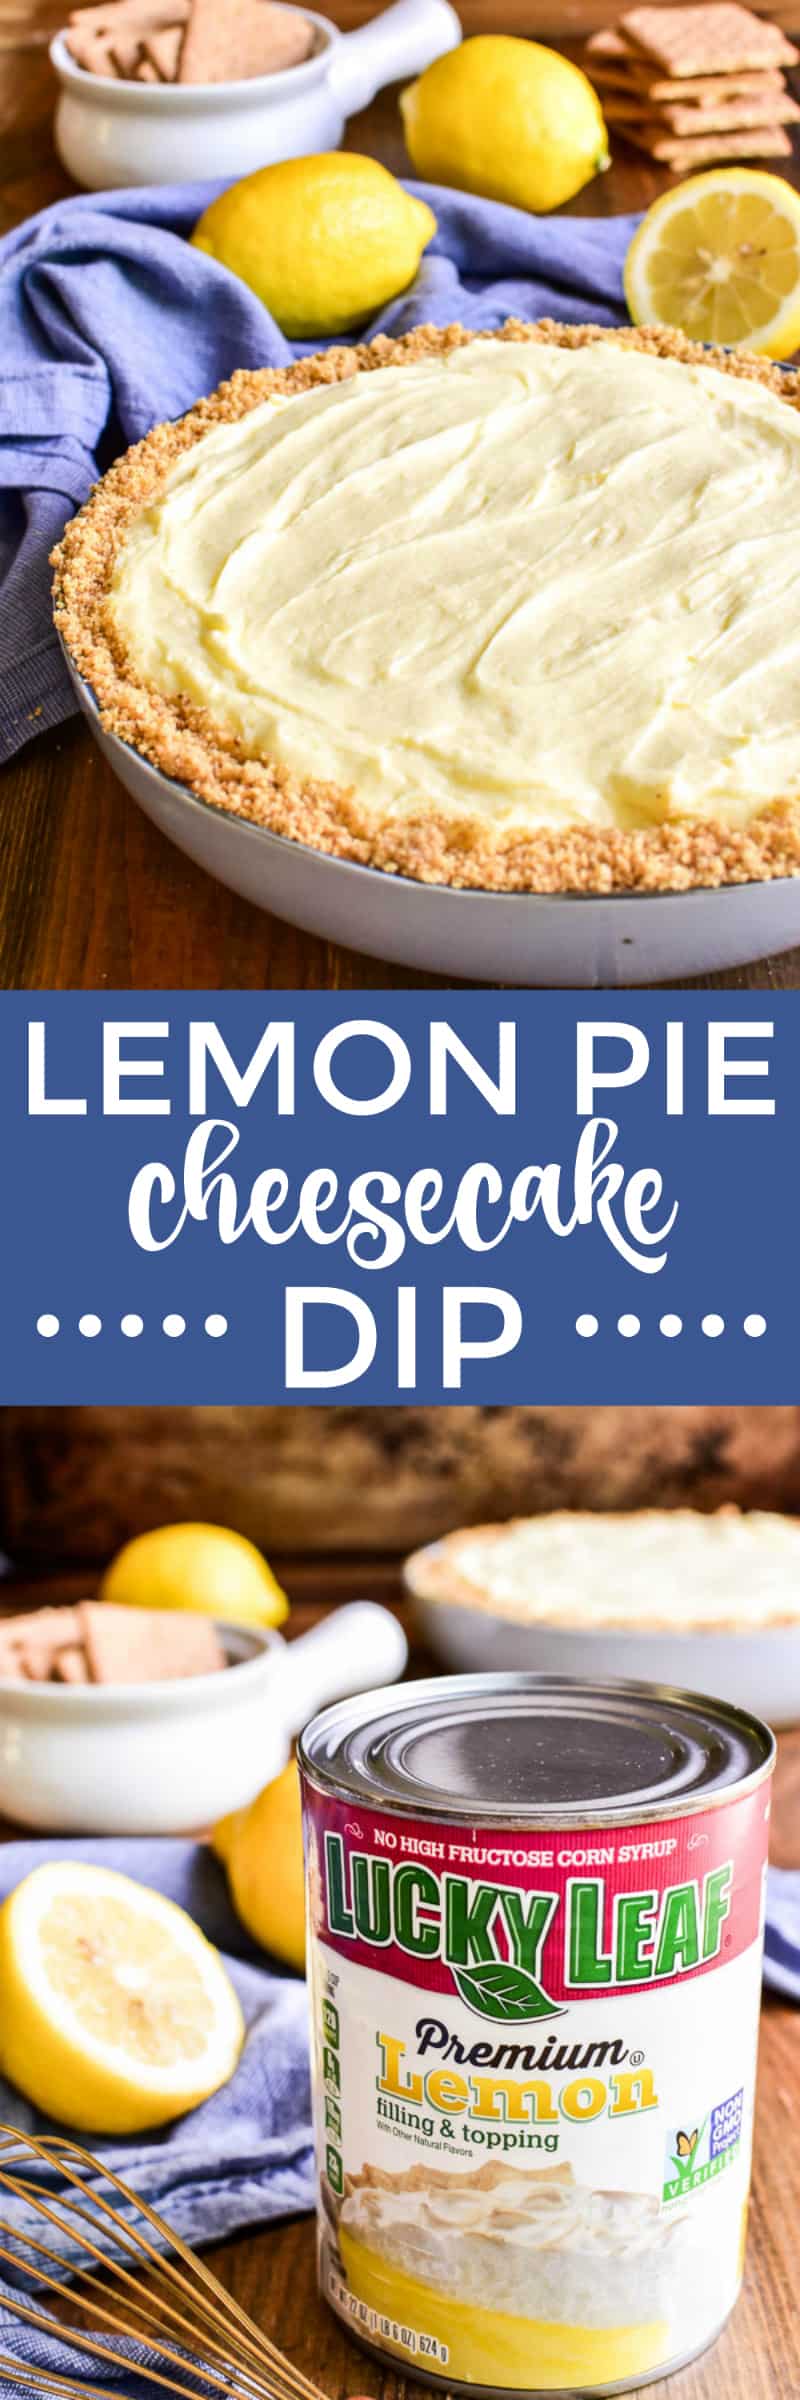 Collage image of Lemon Pie Cheesecake Dip and Lucky Leaf Lemon Filling & Topping